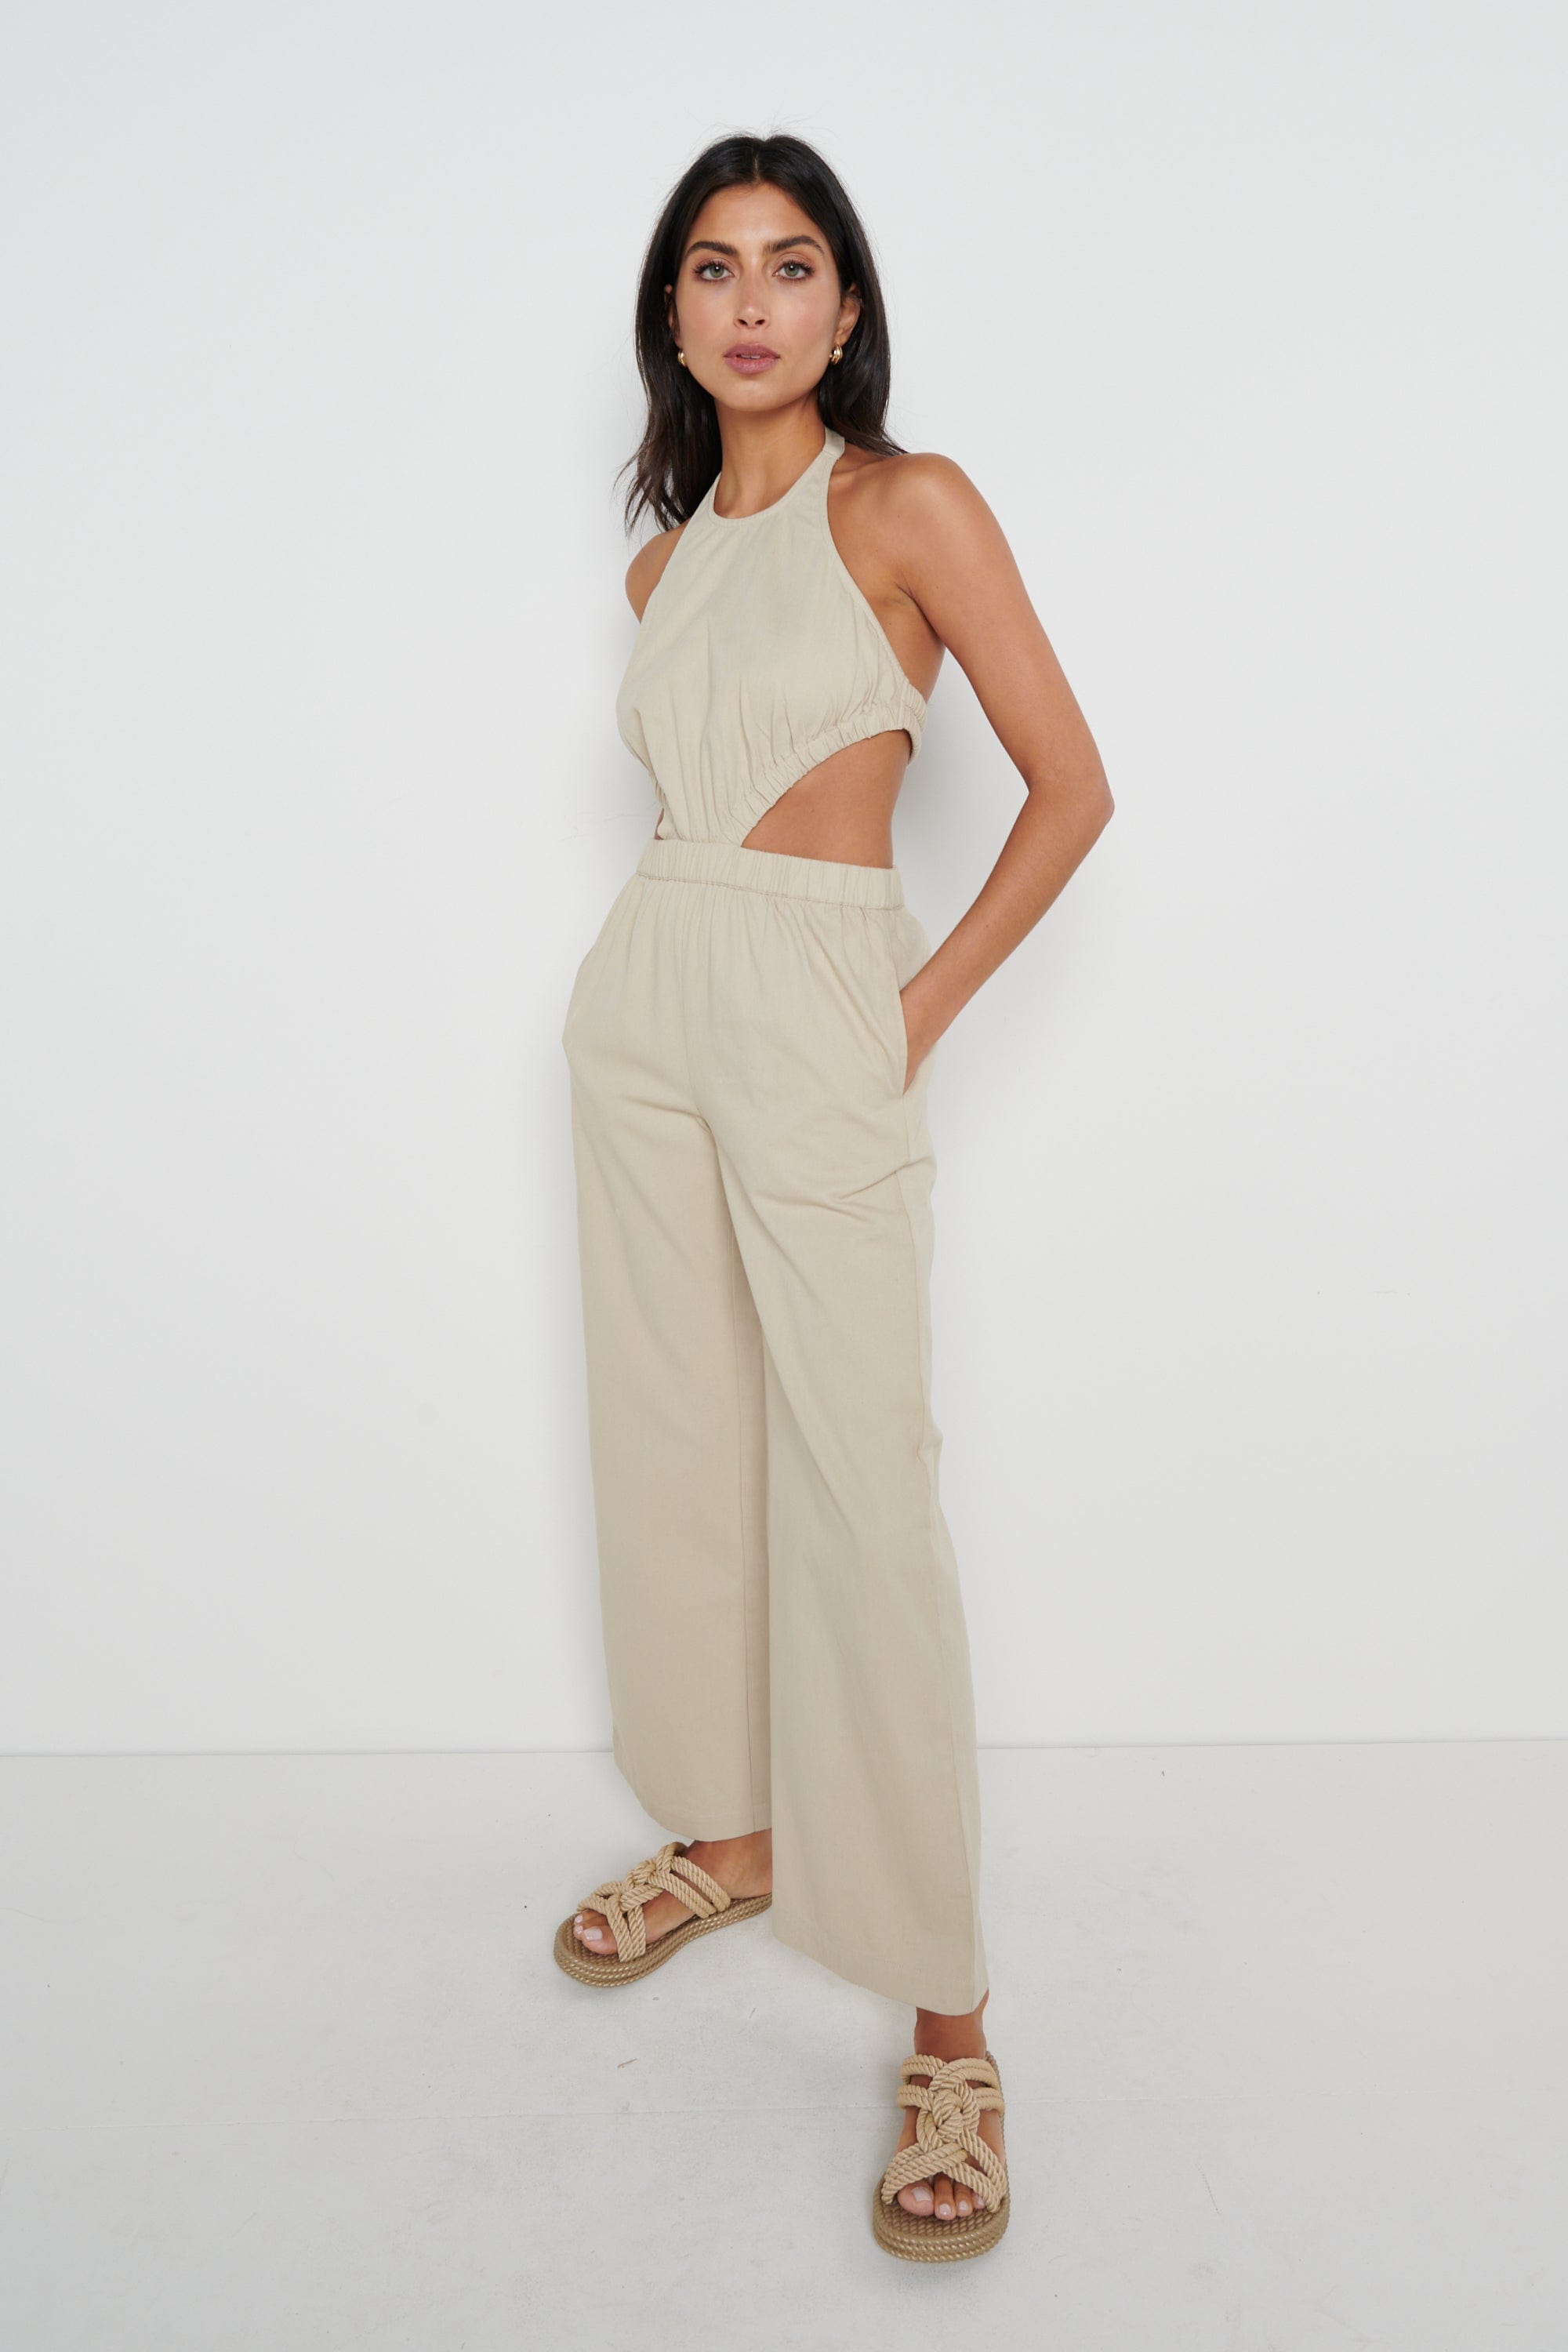 Lexi Scrunch Backless Jumpsuit - Taupe, 16